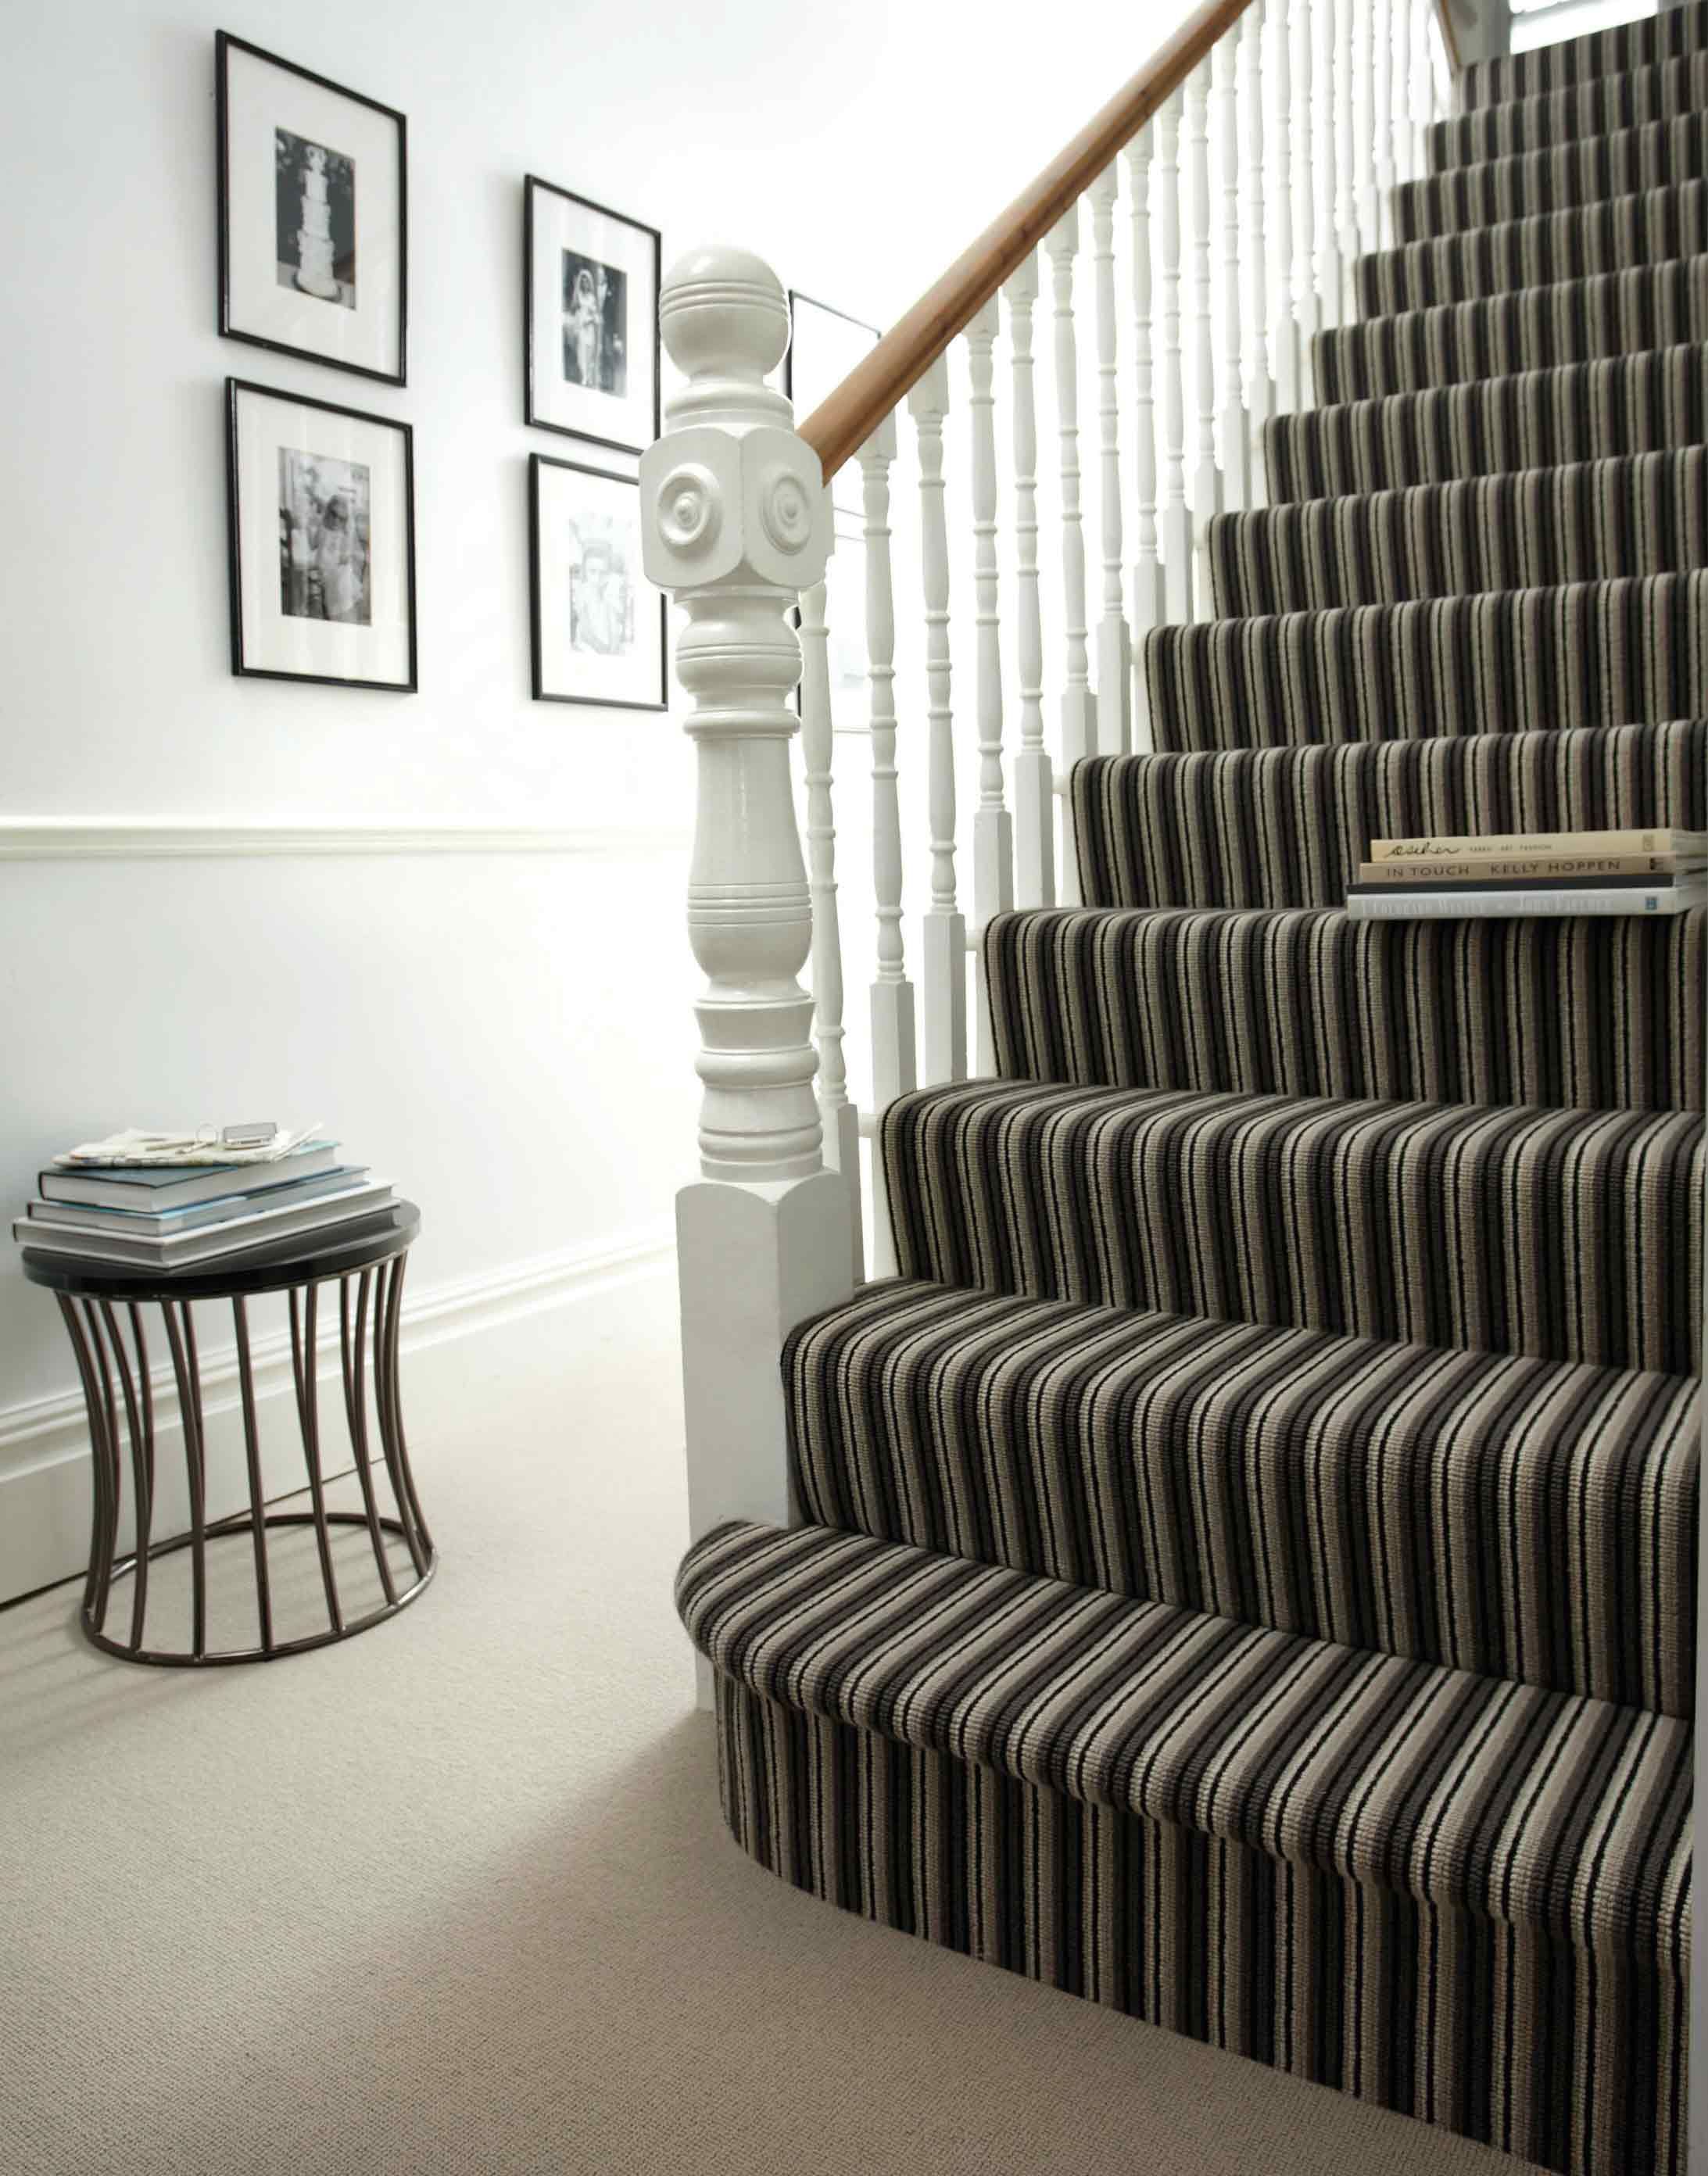 compatible carpets for stairs and hallways - Google Search … | Pinteres…